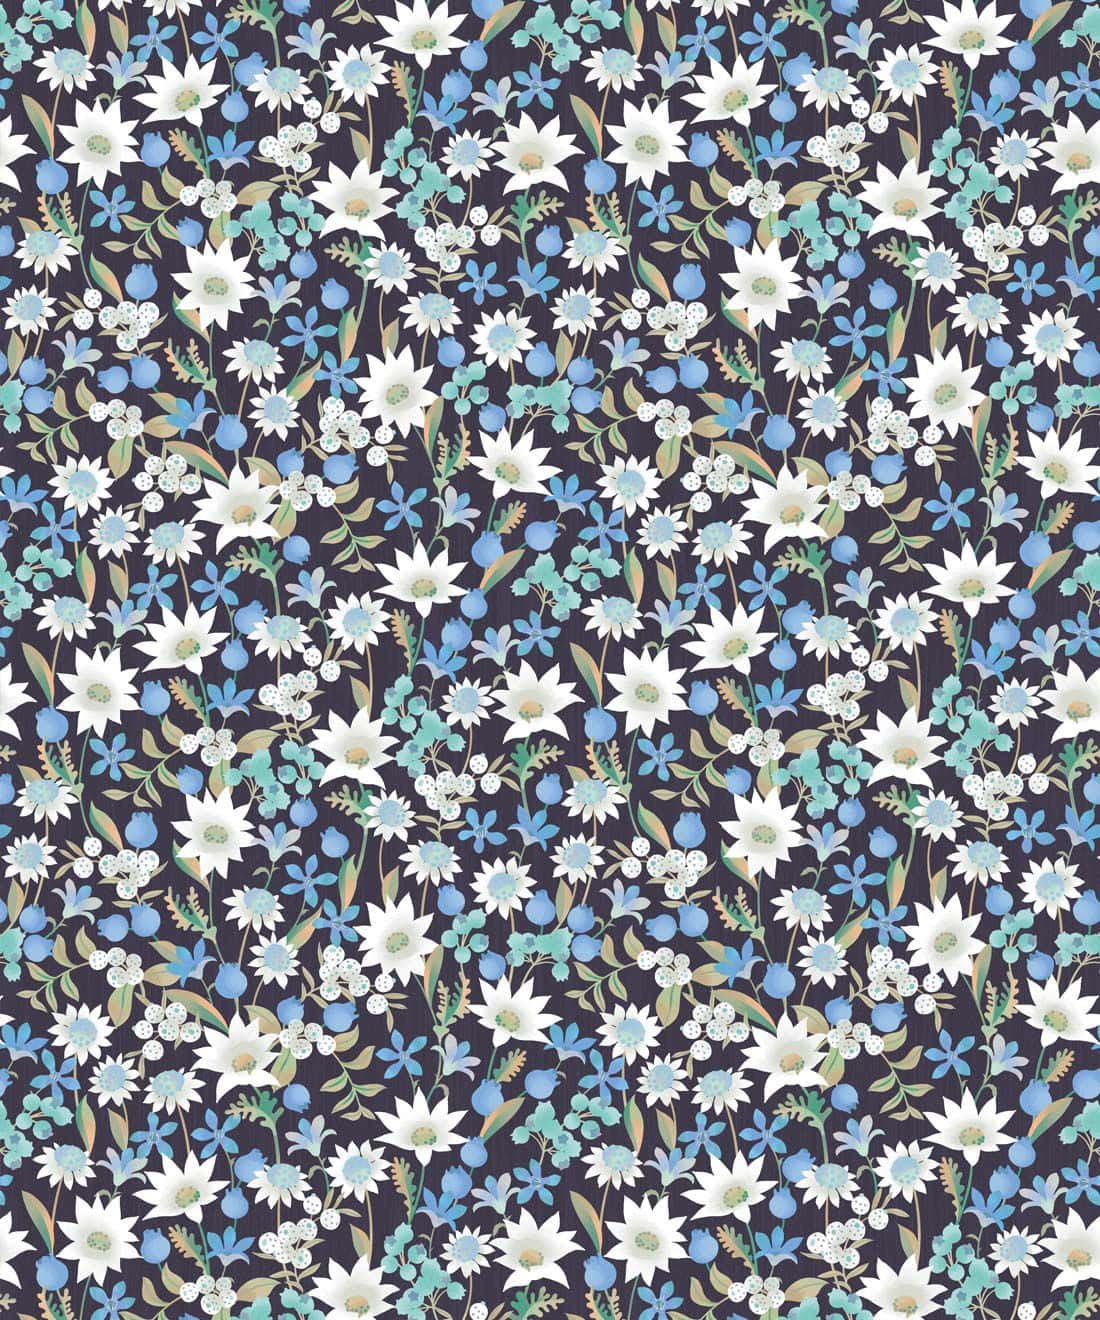 A Floral Pattern With Blue And White Flowers